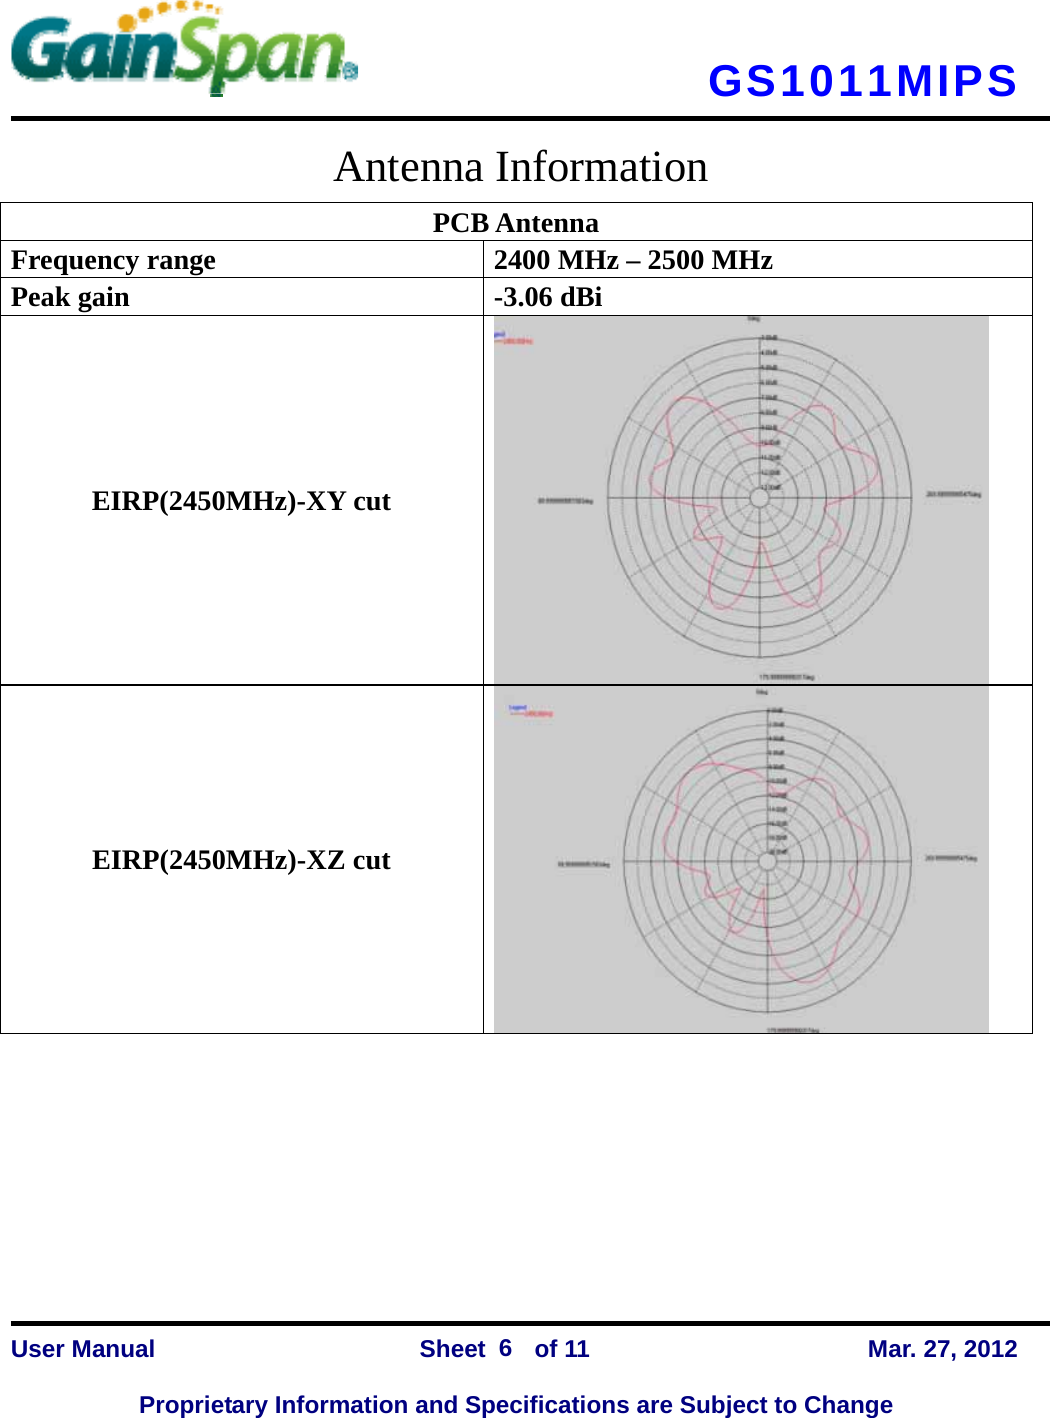      GS1011MIPS    User Manual                Sheet    of 11      Mar. 27, 2012  Proprietary Information and Specifications are Subject to Change 6 Antenna Information PCB Antenna Frequency range      2400 MHz – 2500 MHz Peak gain  -3.06 dBi EIRP(2450MHz)-XY cut  EIRP(2450MHz)-XZ cut  